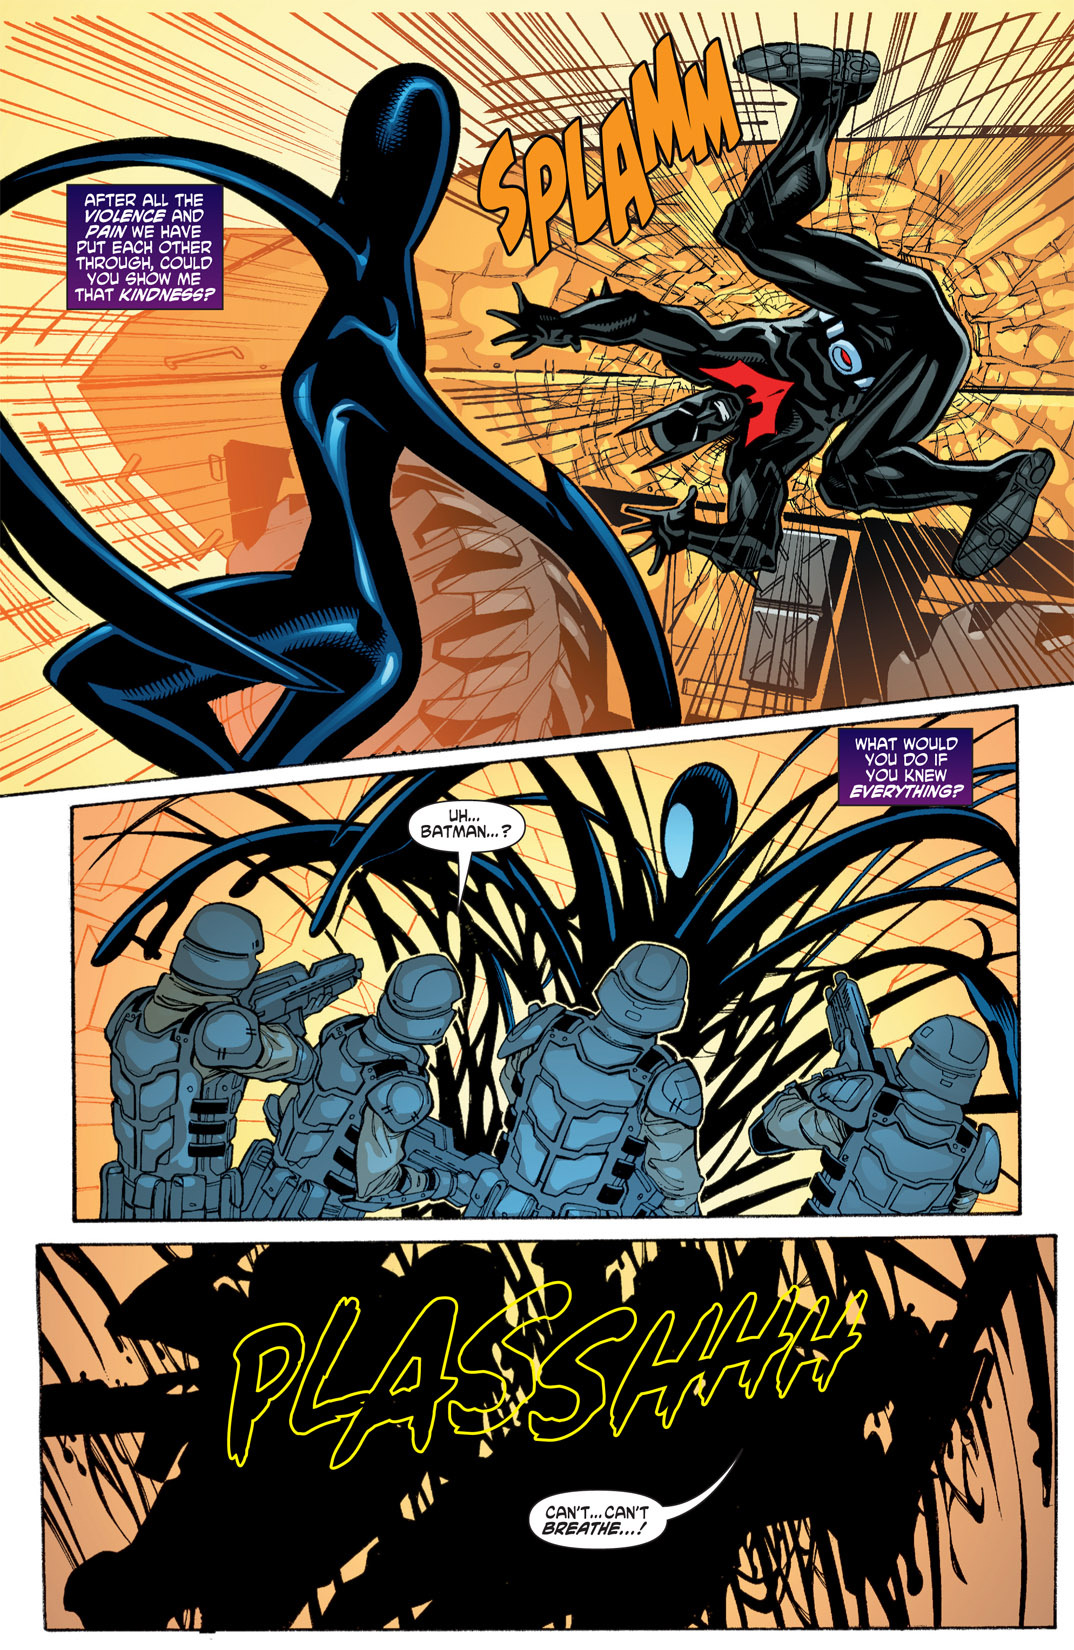 Inque Blots — (from Batman Beyond issue #8…is the final part in...